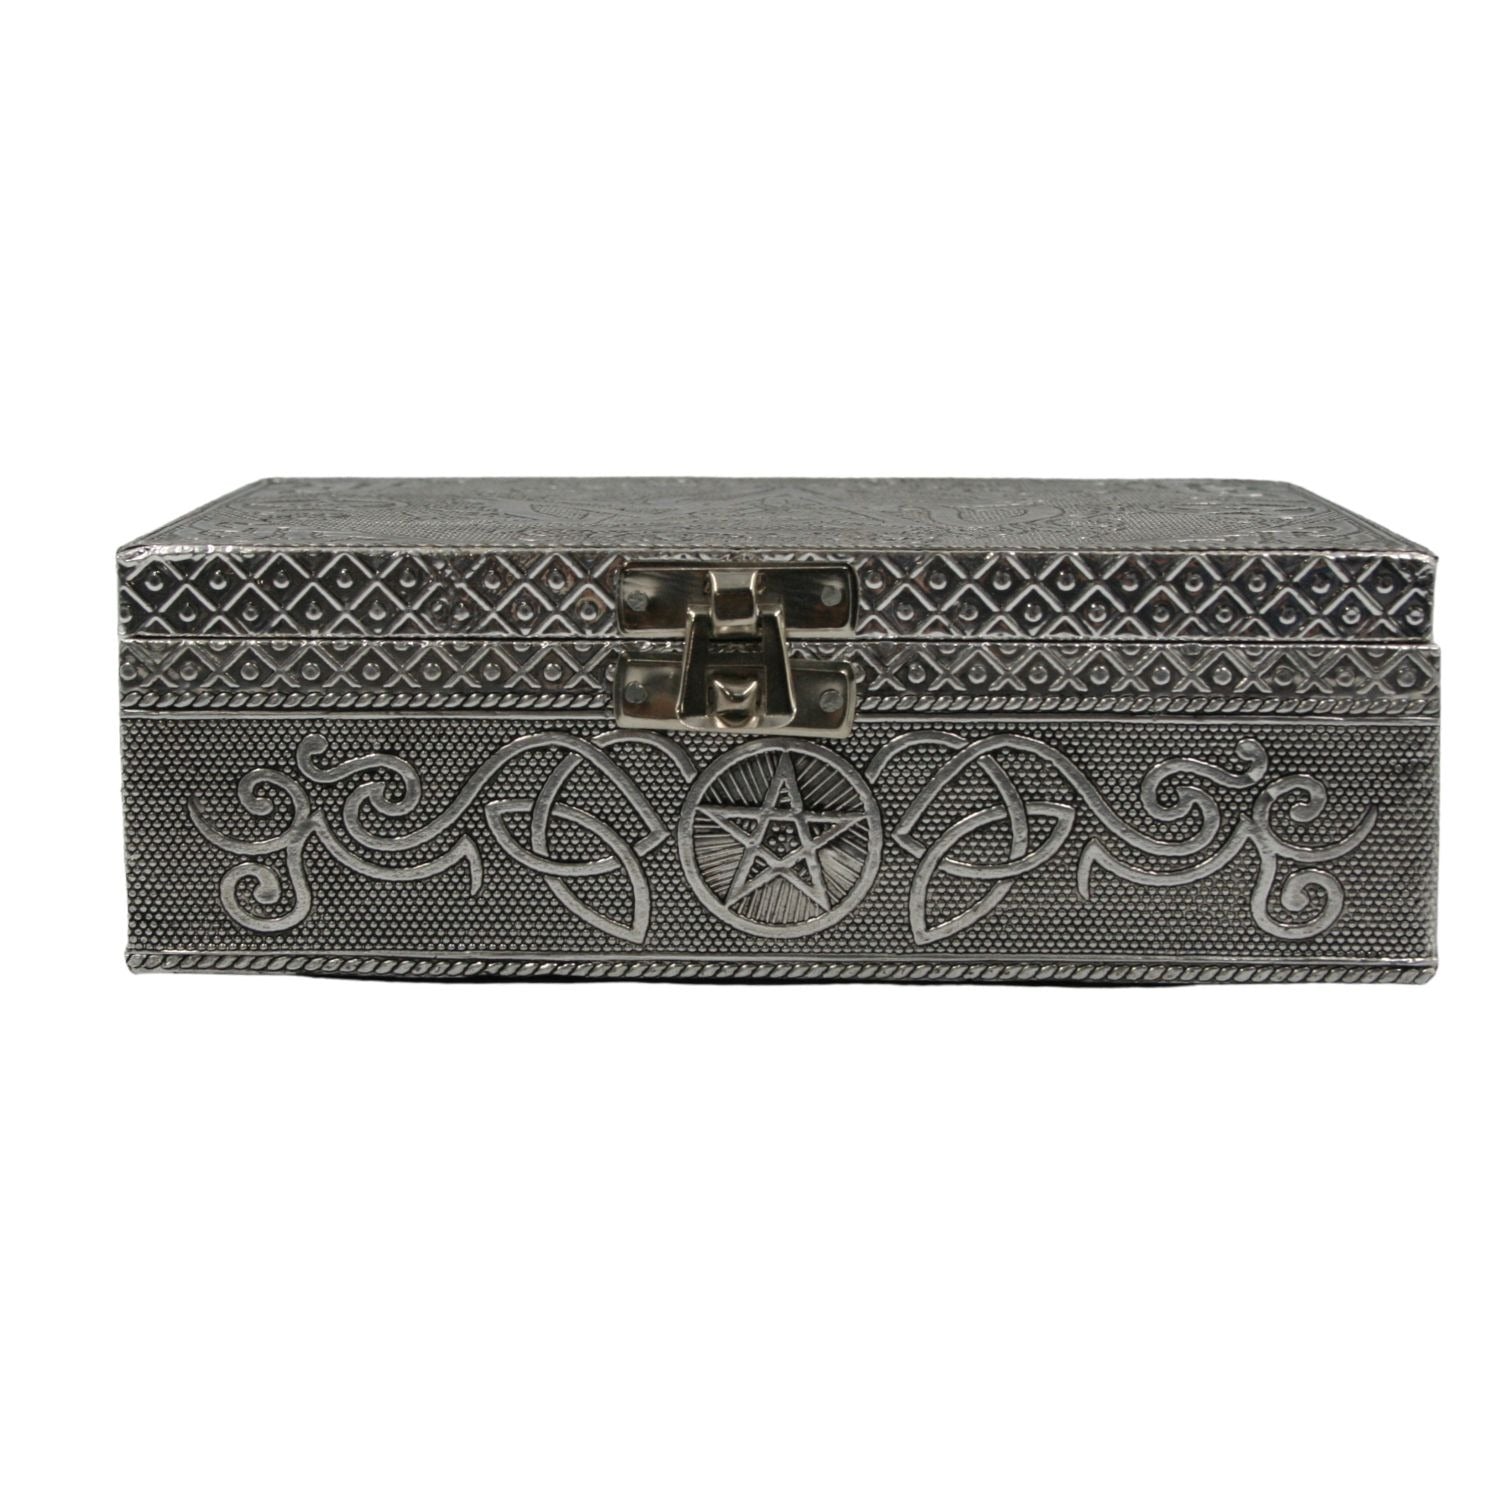 Pentagram Carved Metal over Wood 4.75 x 6.75" Box with latch